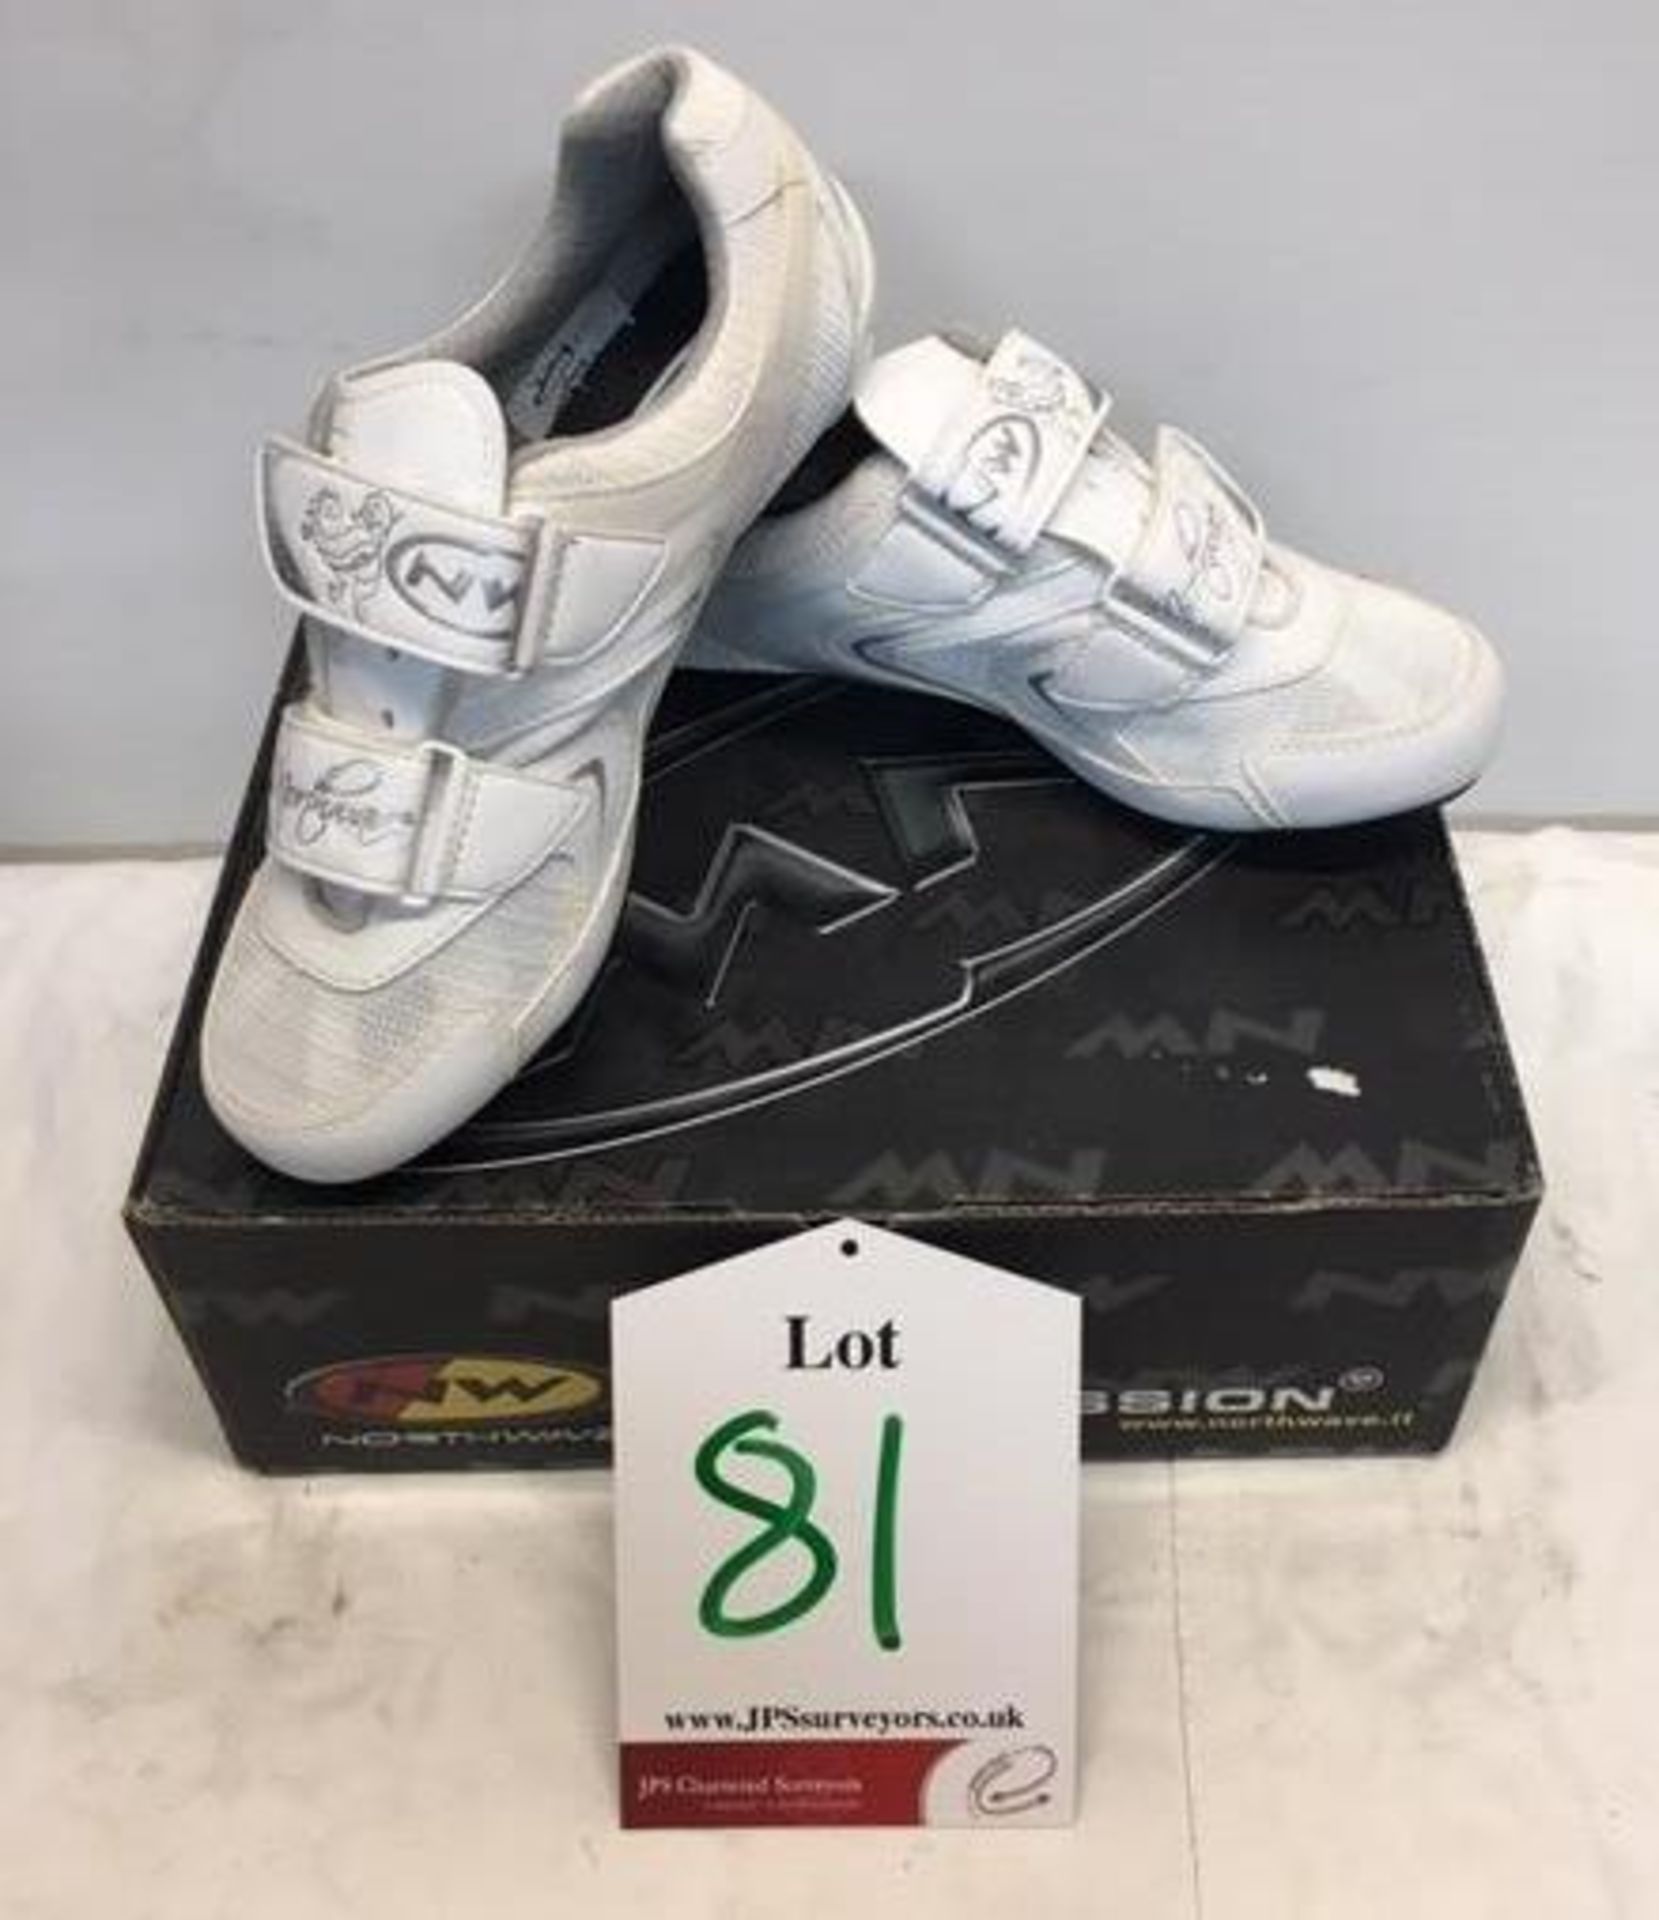 Northwave Ladies Eclipse Cycling Boots in White/Silver | EUR 39 | RRP £50.00